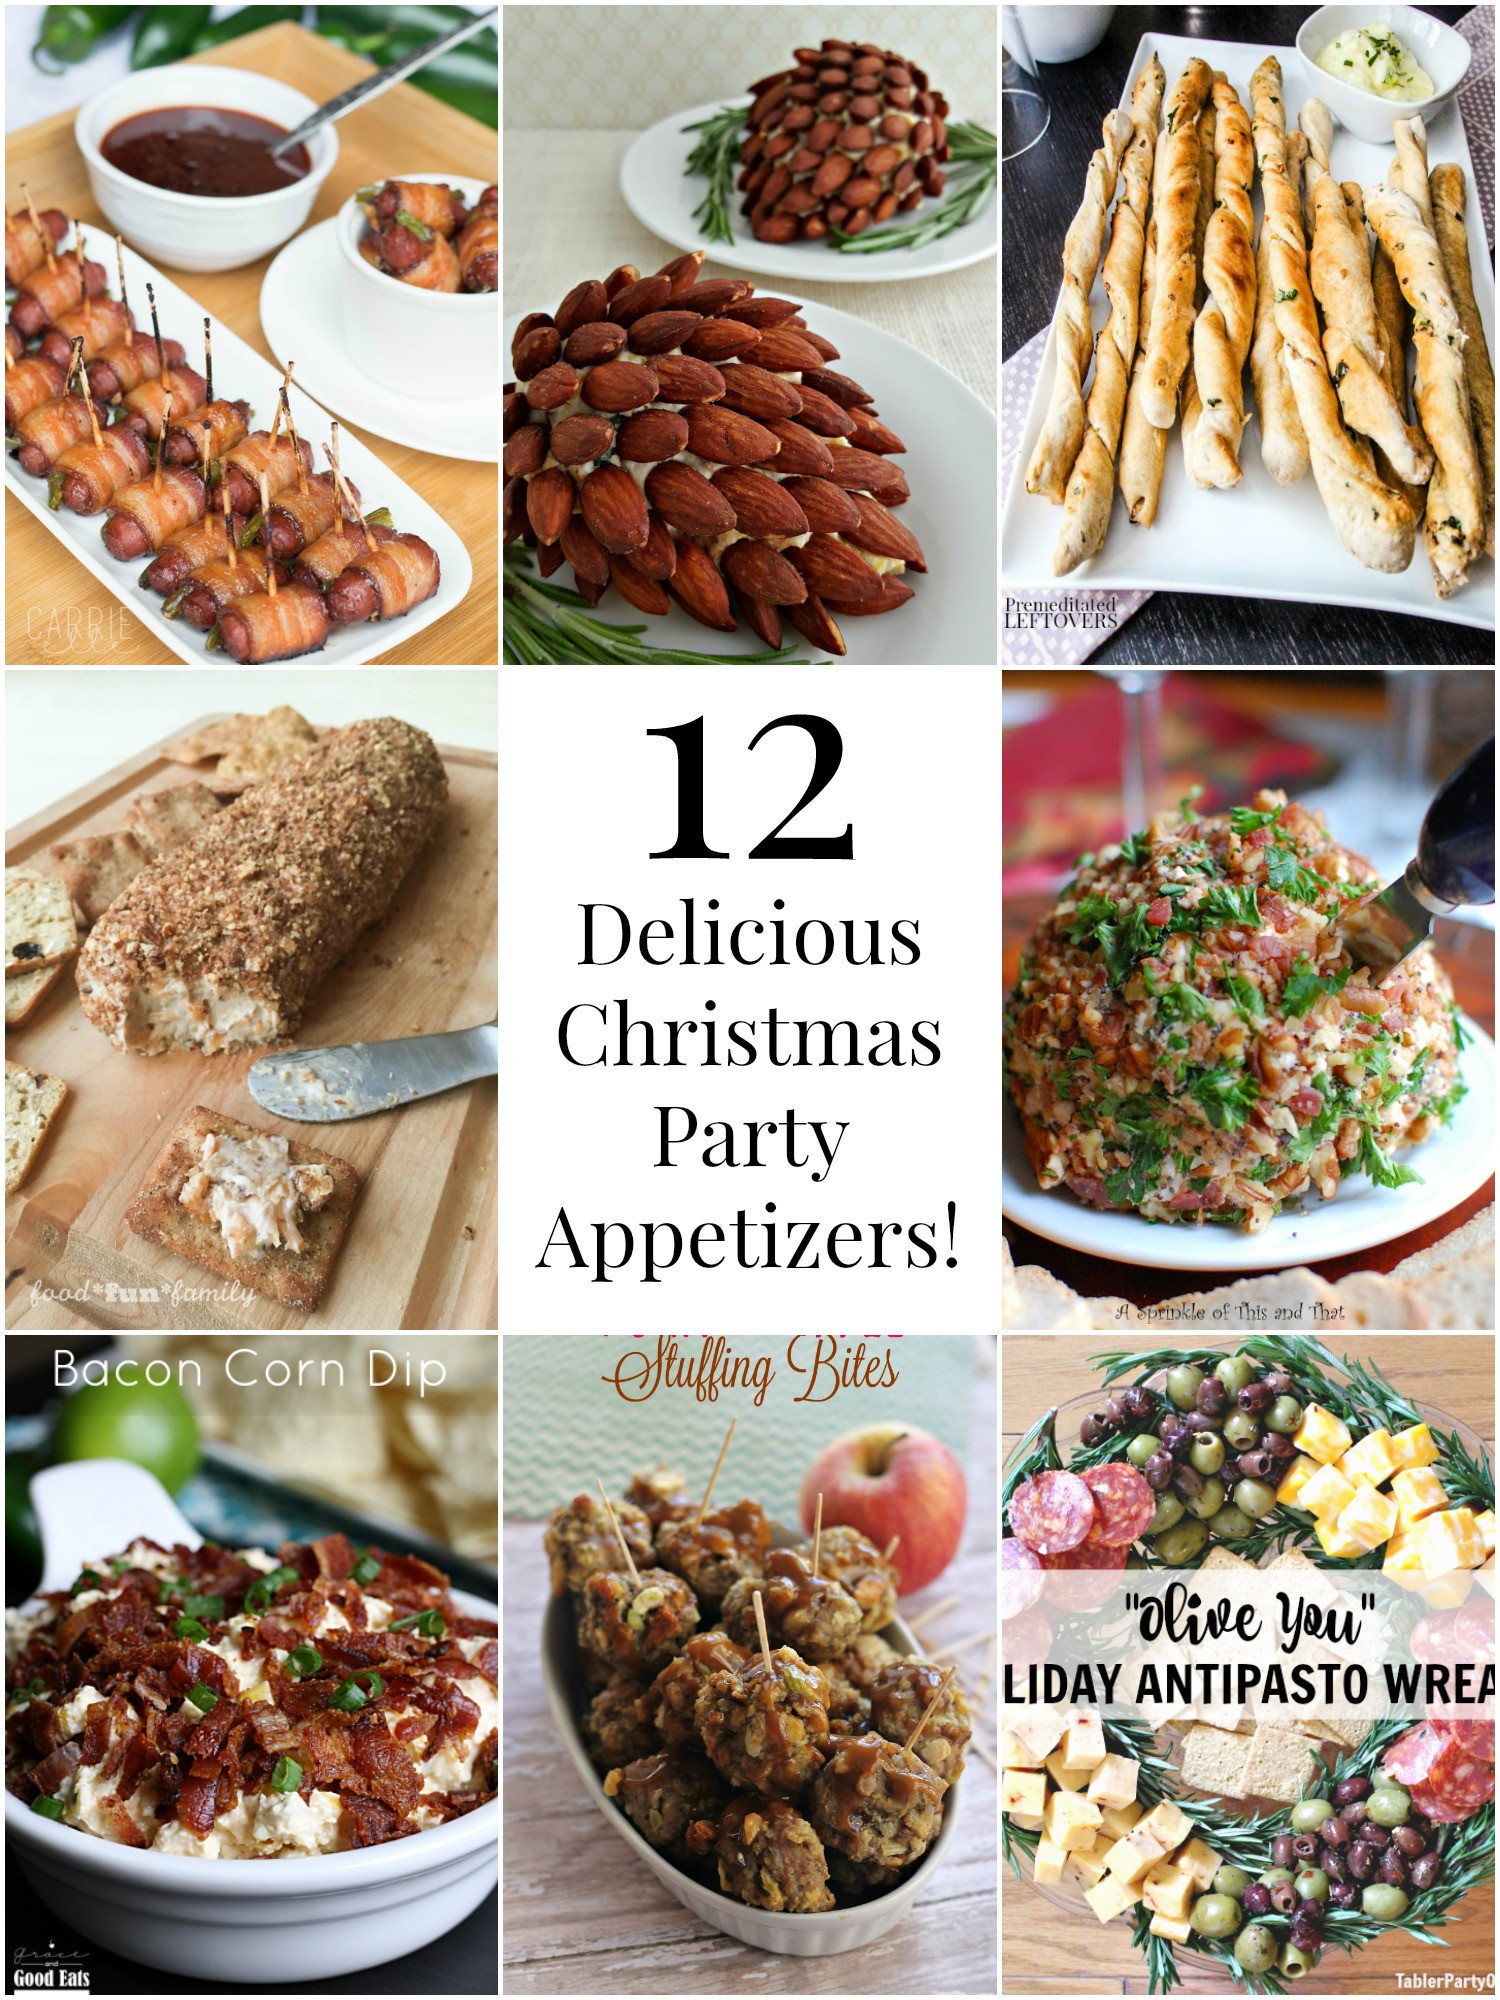 Christmas Party Appetizers
 So Creative 12 Delicious Christmas Party Appetizers